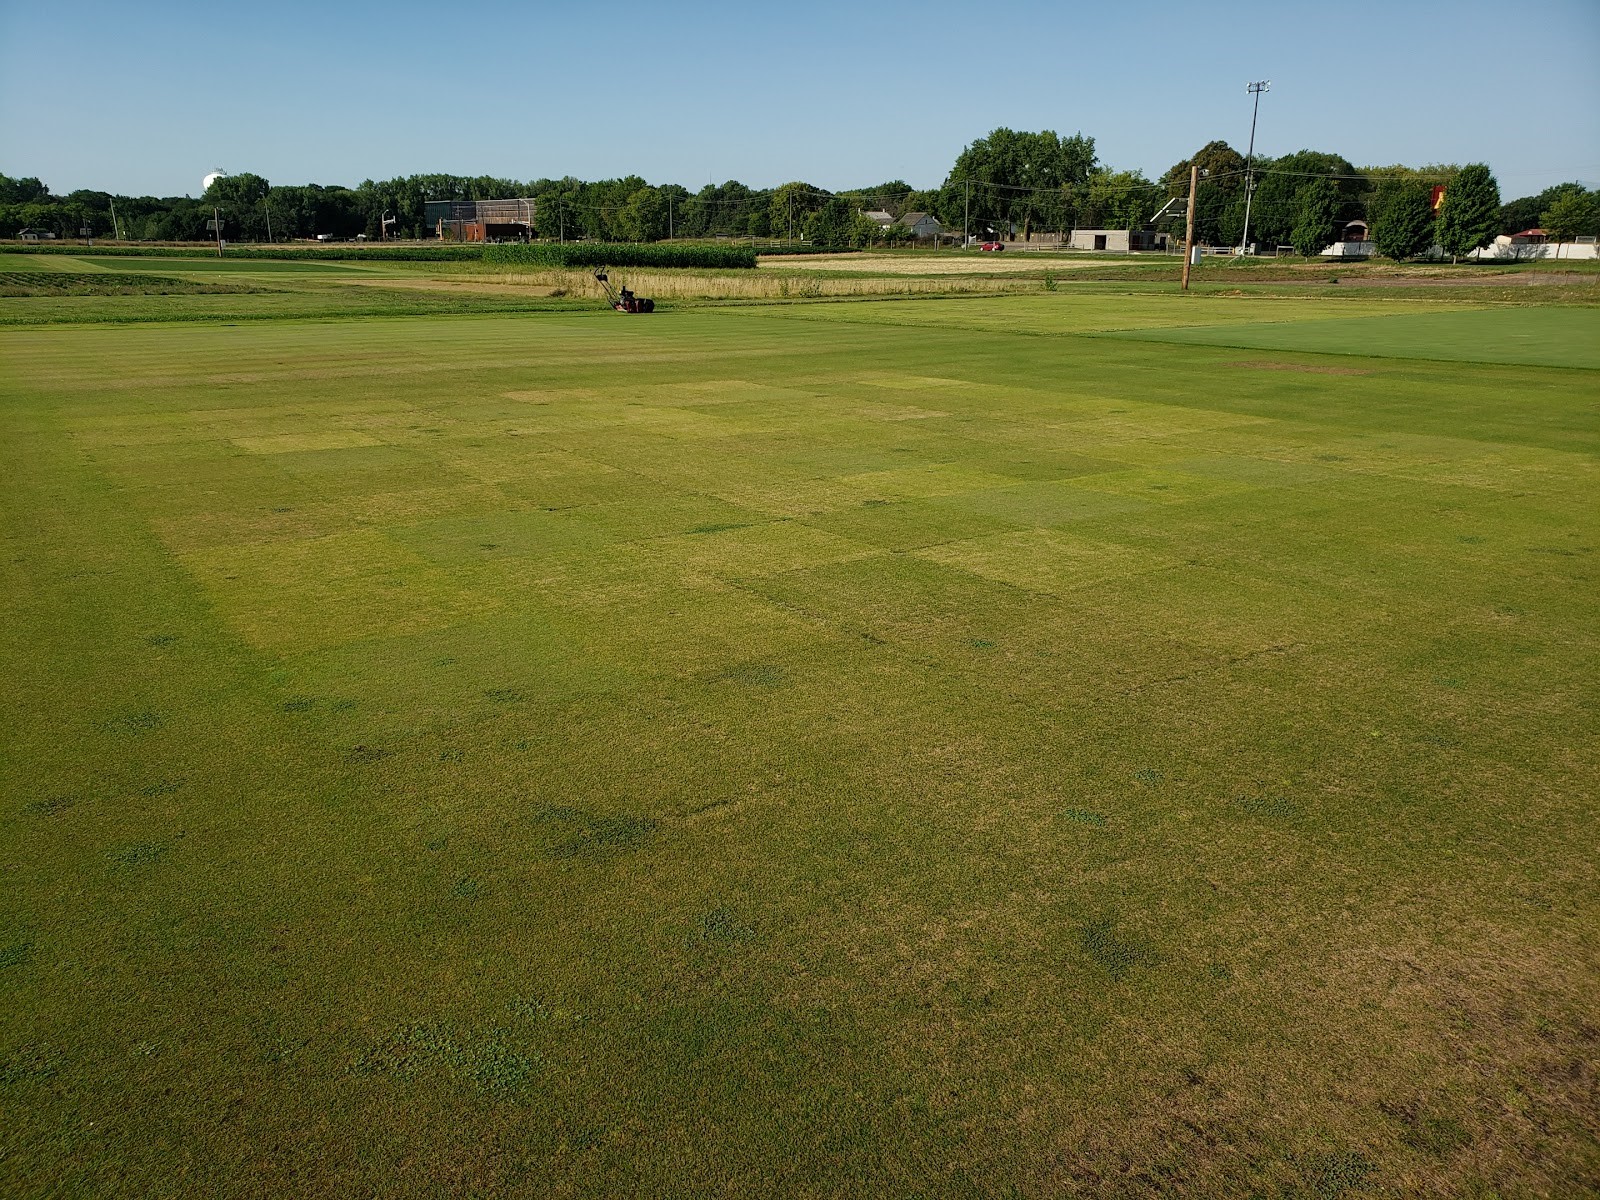 Putting green research plots at the University of Minnesota 